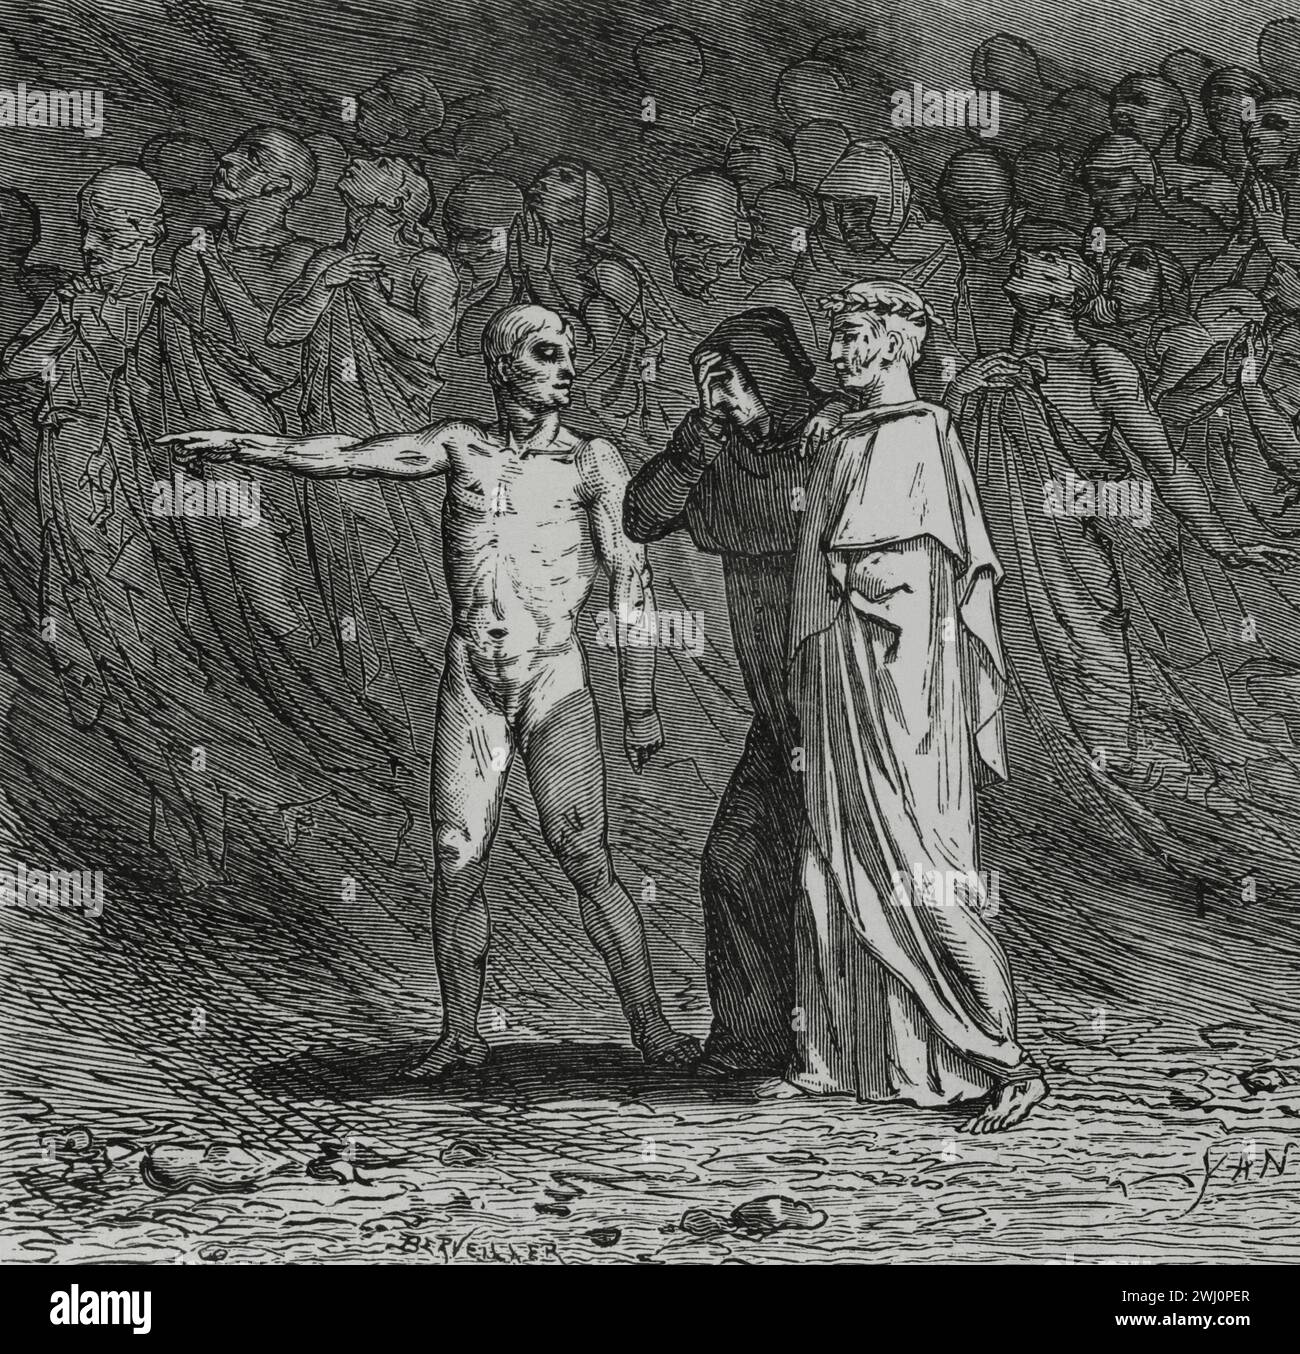 The Divine Comedy (1307-1321). Italian narrative poem by the Italian poet Dante Alighieri (1265-1321). Purgatory. 'So moved I through that foul and acrid air...' Illustration by Yann Dargent (1824-1899). Engraving by Berveiller. Published in Paris, 1888. Stock Photo